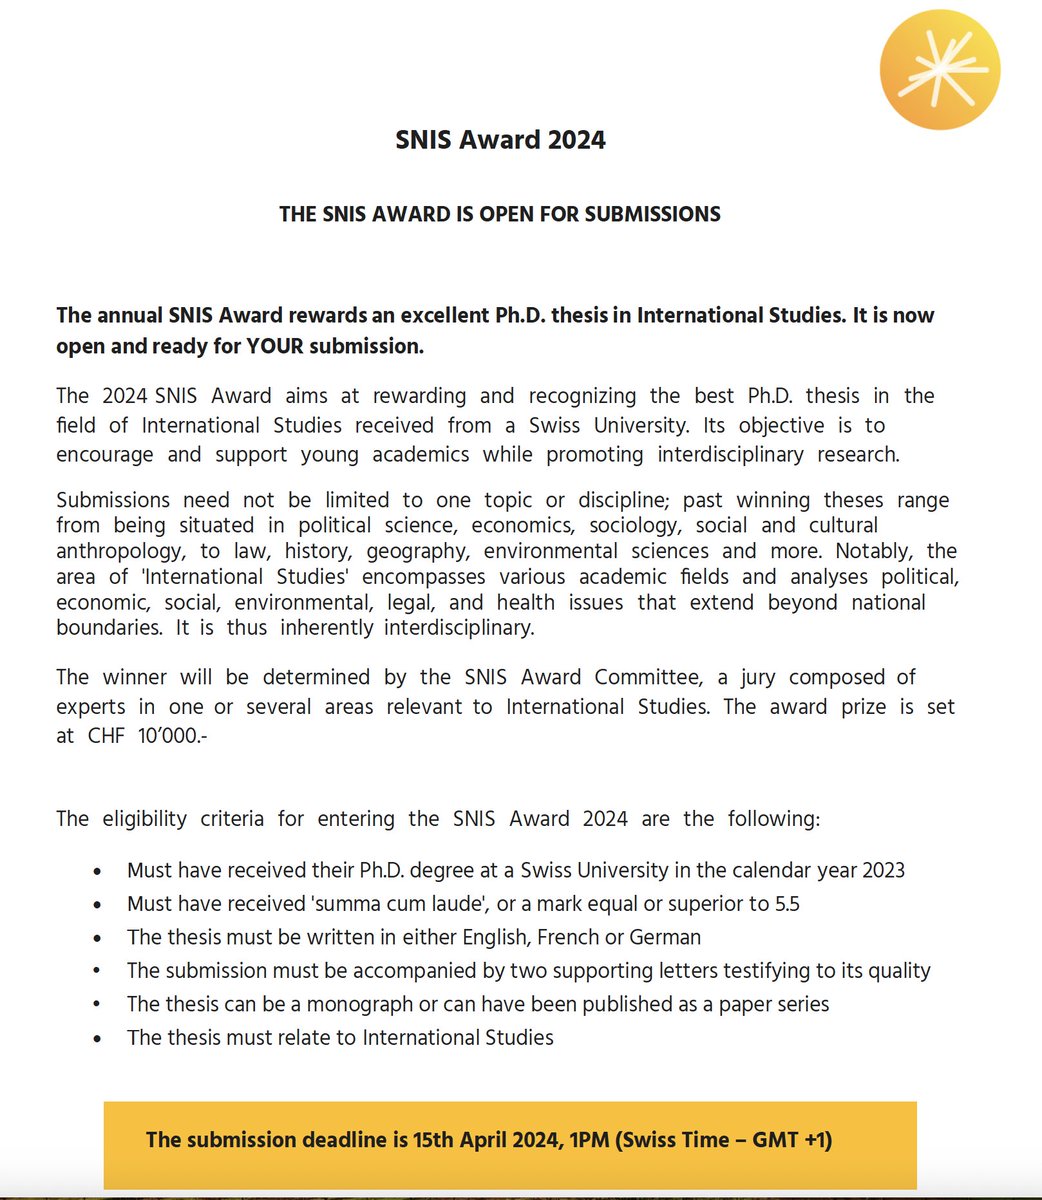 SNIS AWARD FOR THE BEST THESIS DEADLINE UPDATE : NEW DEADLINE 15TH APRIL 13:00 CET